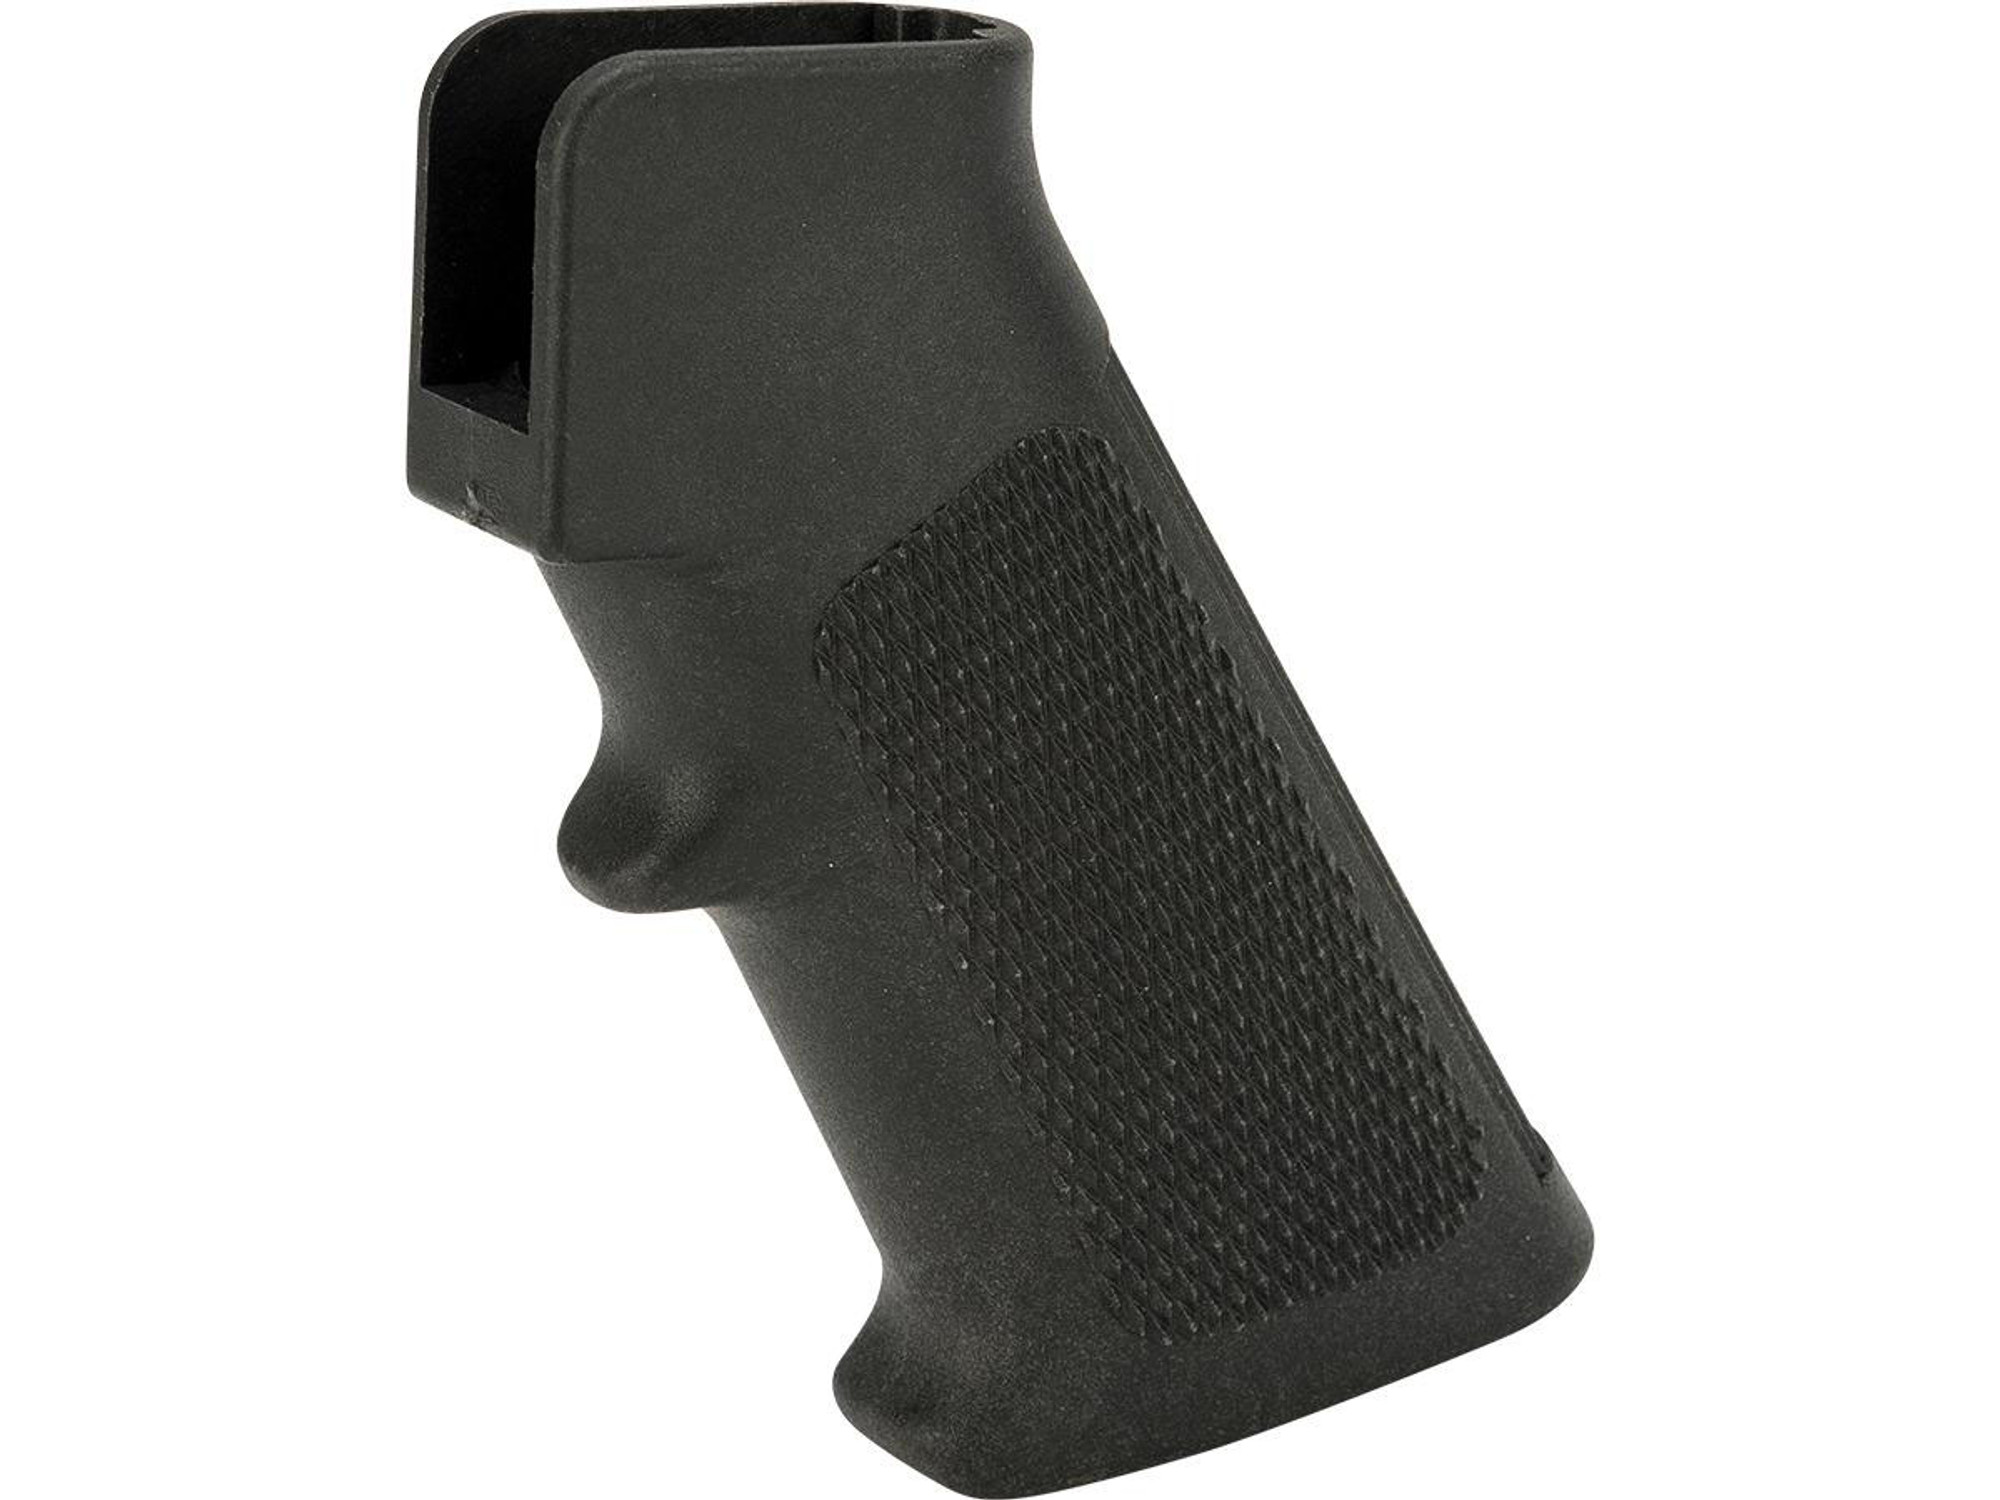 A&K Pistol Grip for A&K STWSeries AEG Rifle